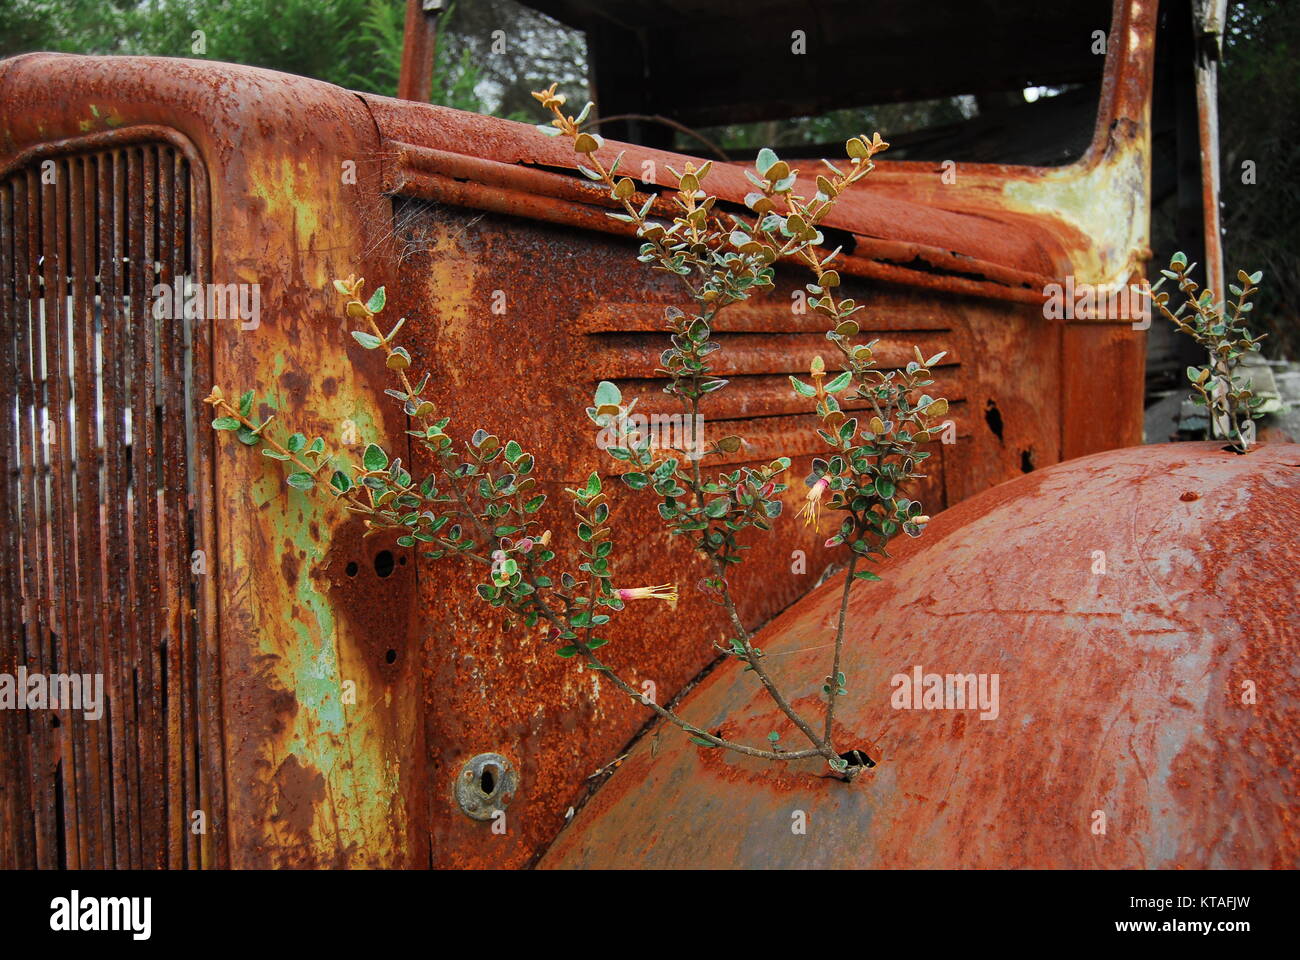 Tree growing through fender of old rusted truck Stock Photo